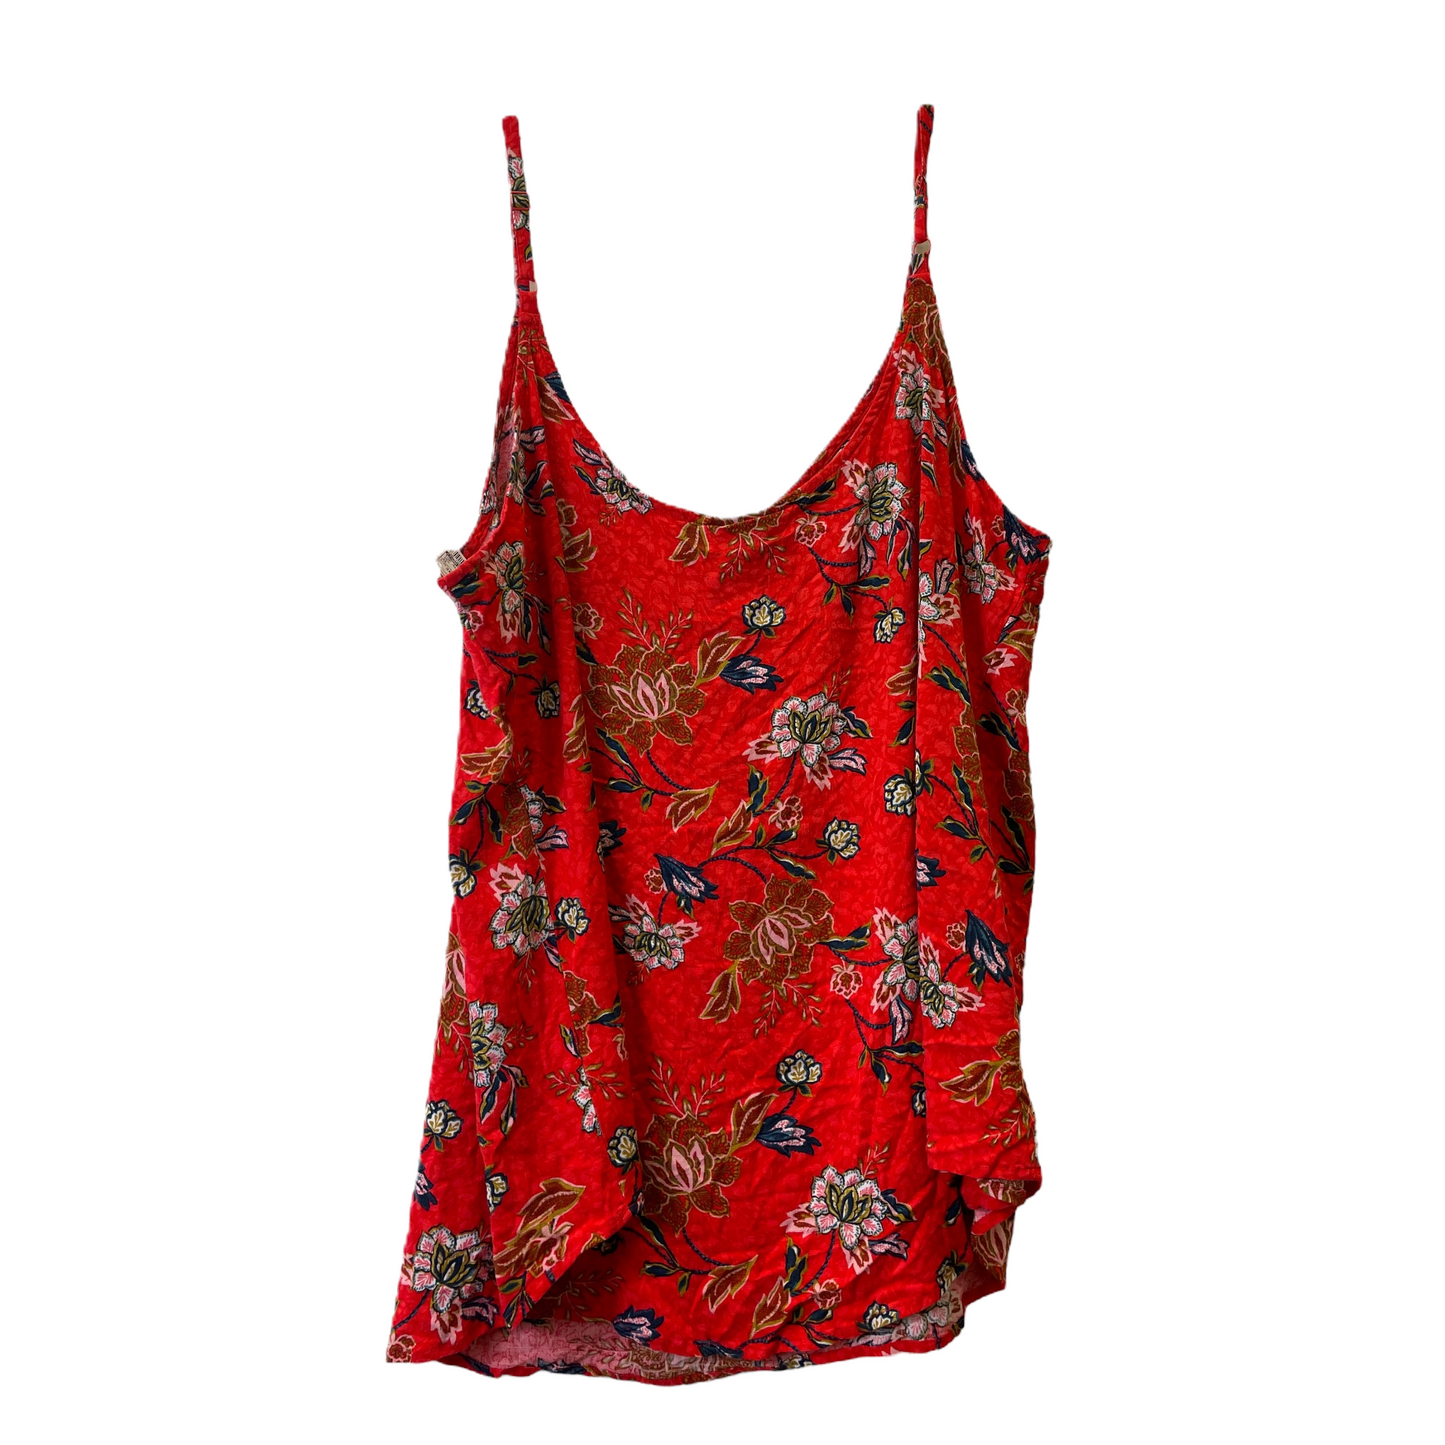 Red Top Sleeveless By Torrid, Size: 3x